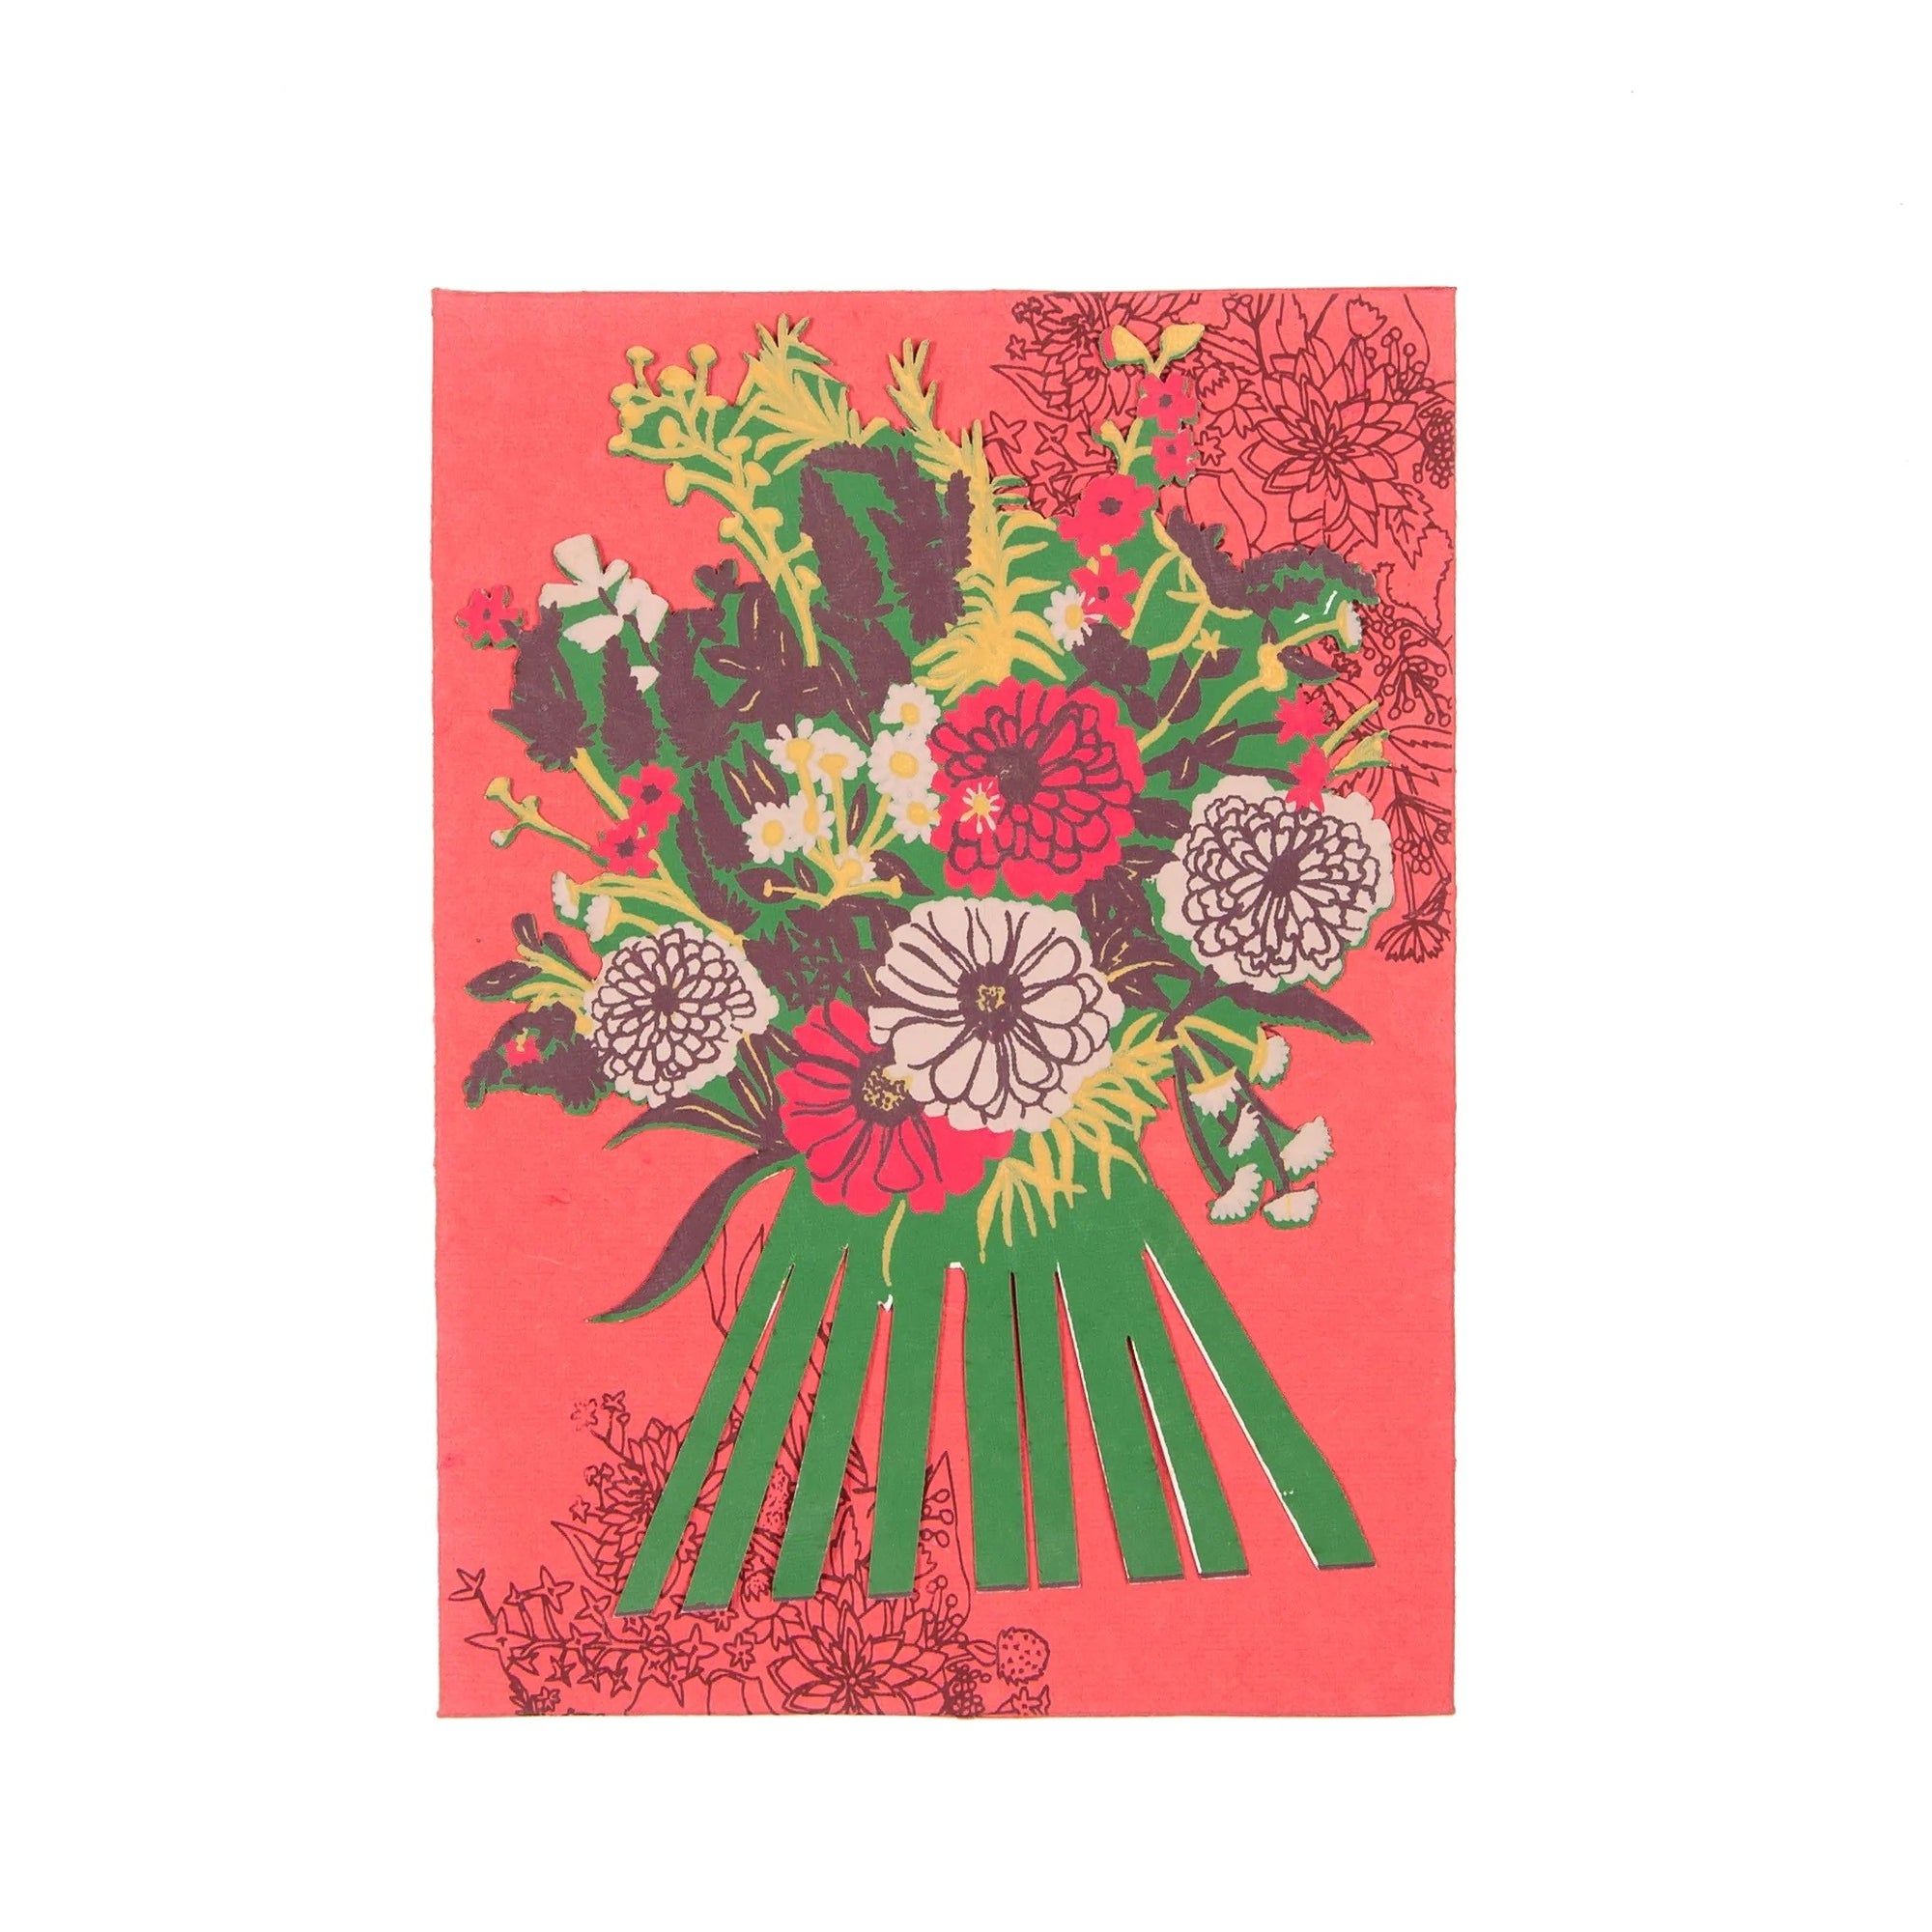 East End Press Marigold Bouquet Greeting Card